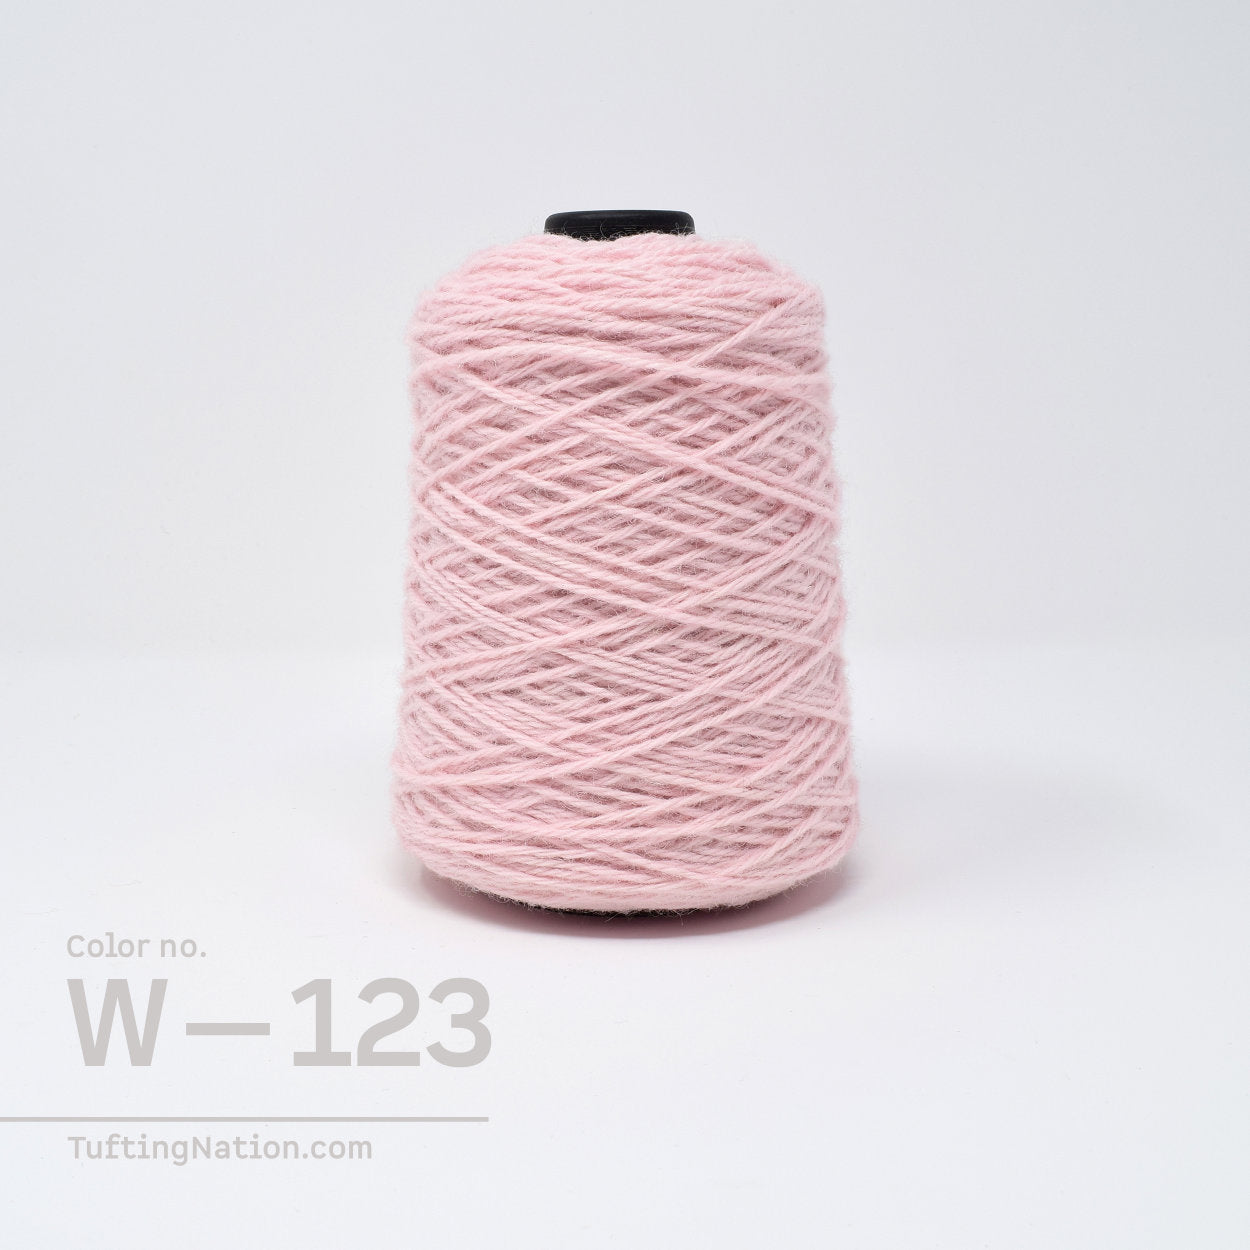 Light Pink Rug Yarn on 1/2 pound spool for Rug Tufting and Weaving | TuftingNation